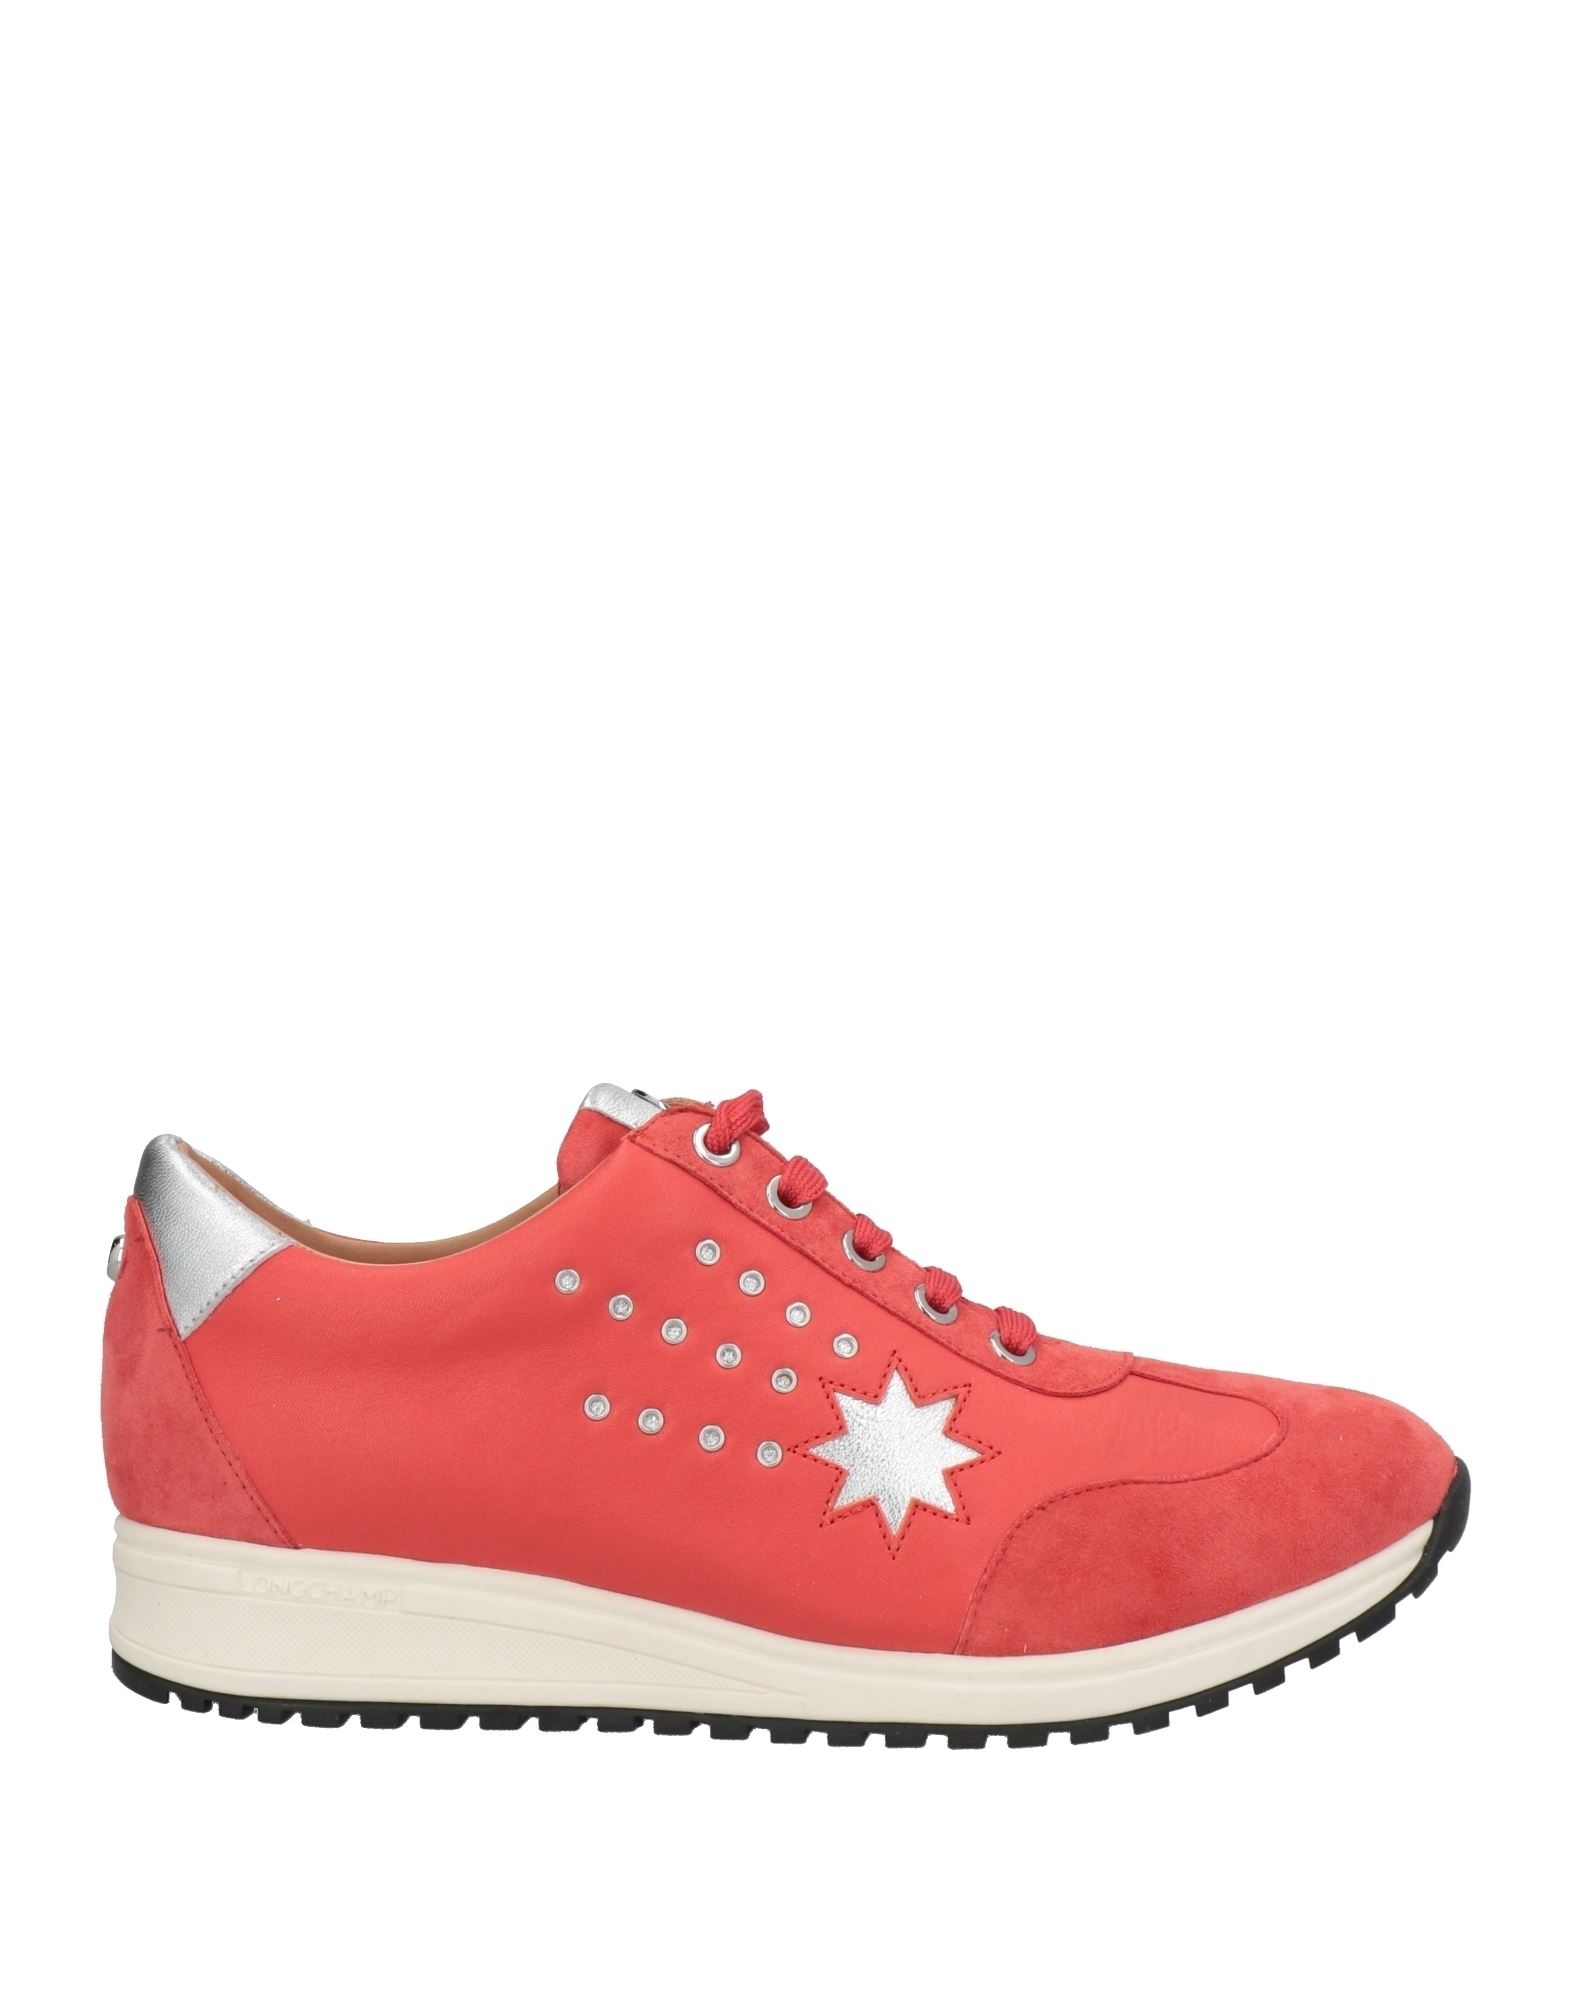 Longchamp Sneakers In Red